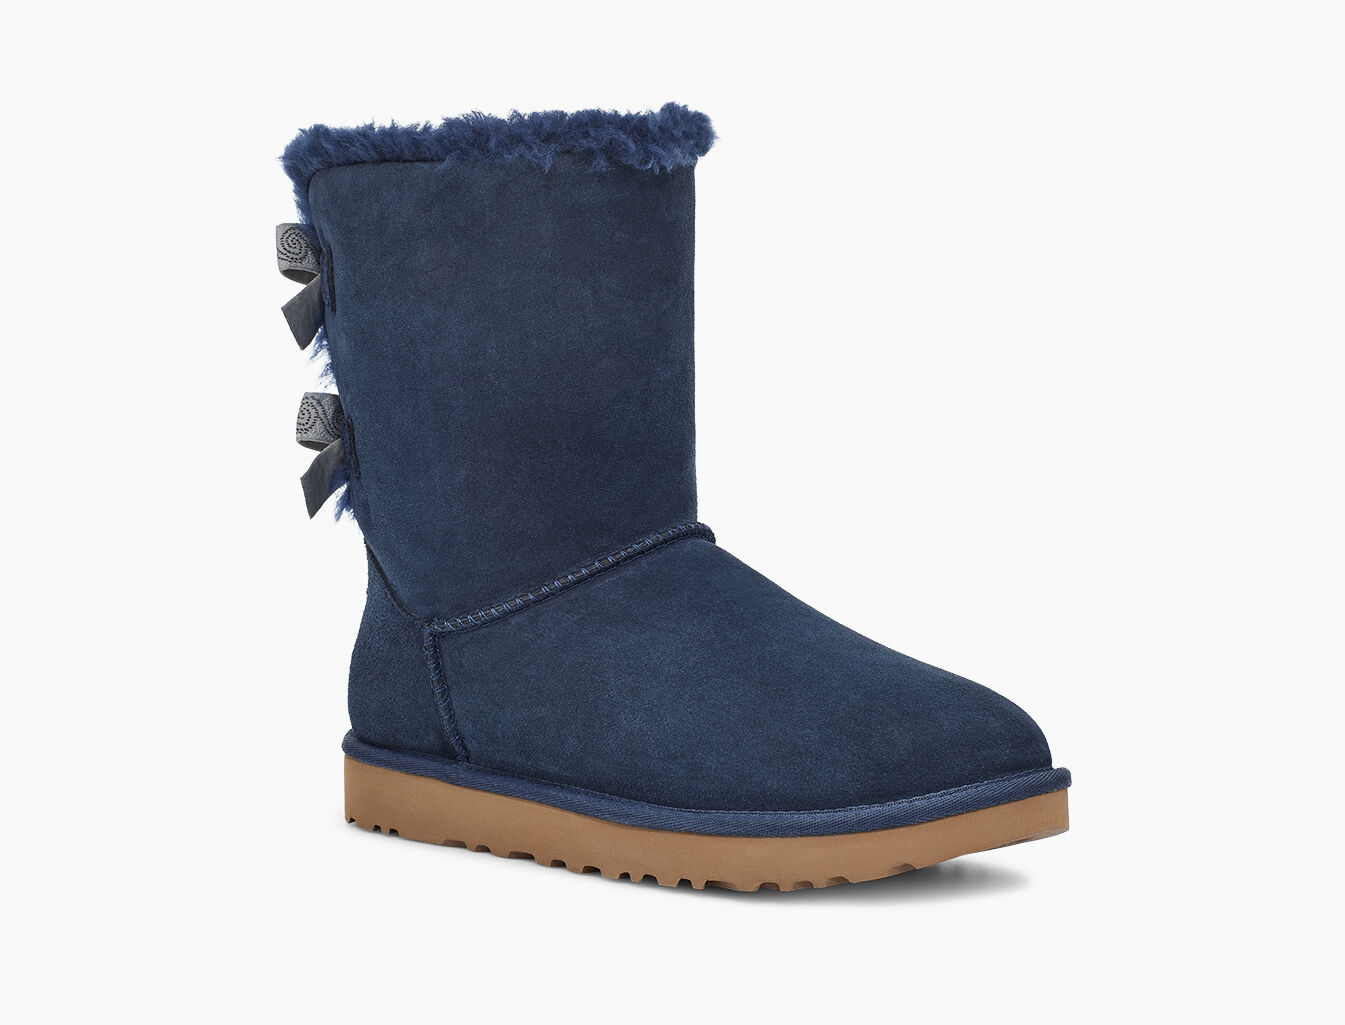 navy blue ugg boots with bows